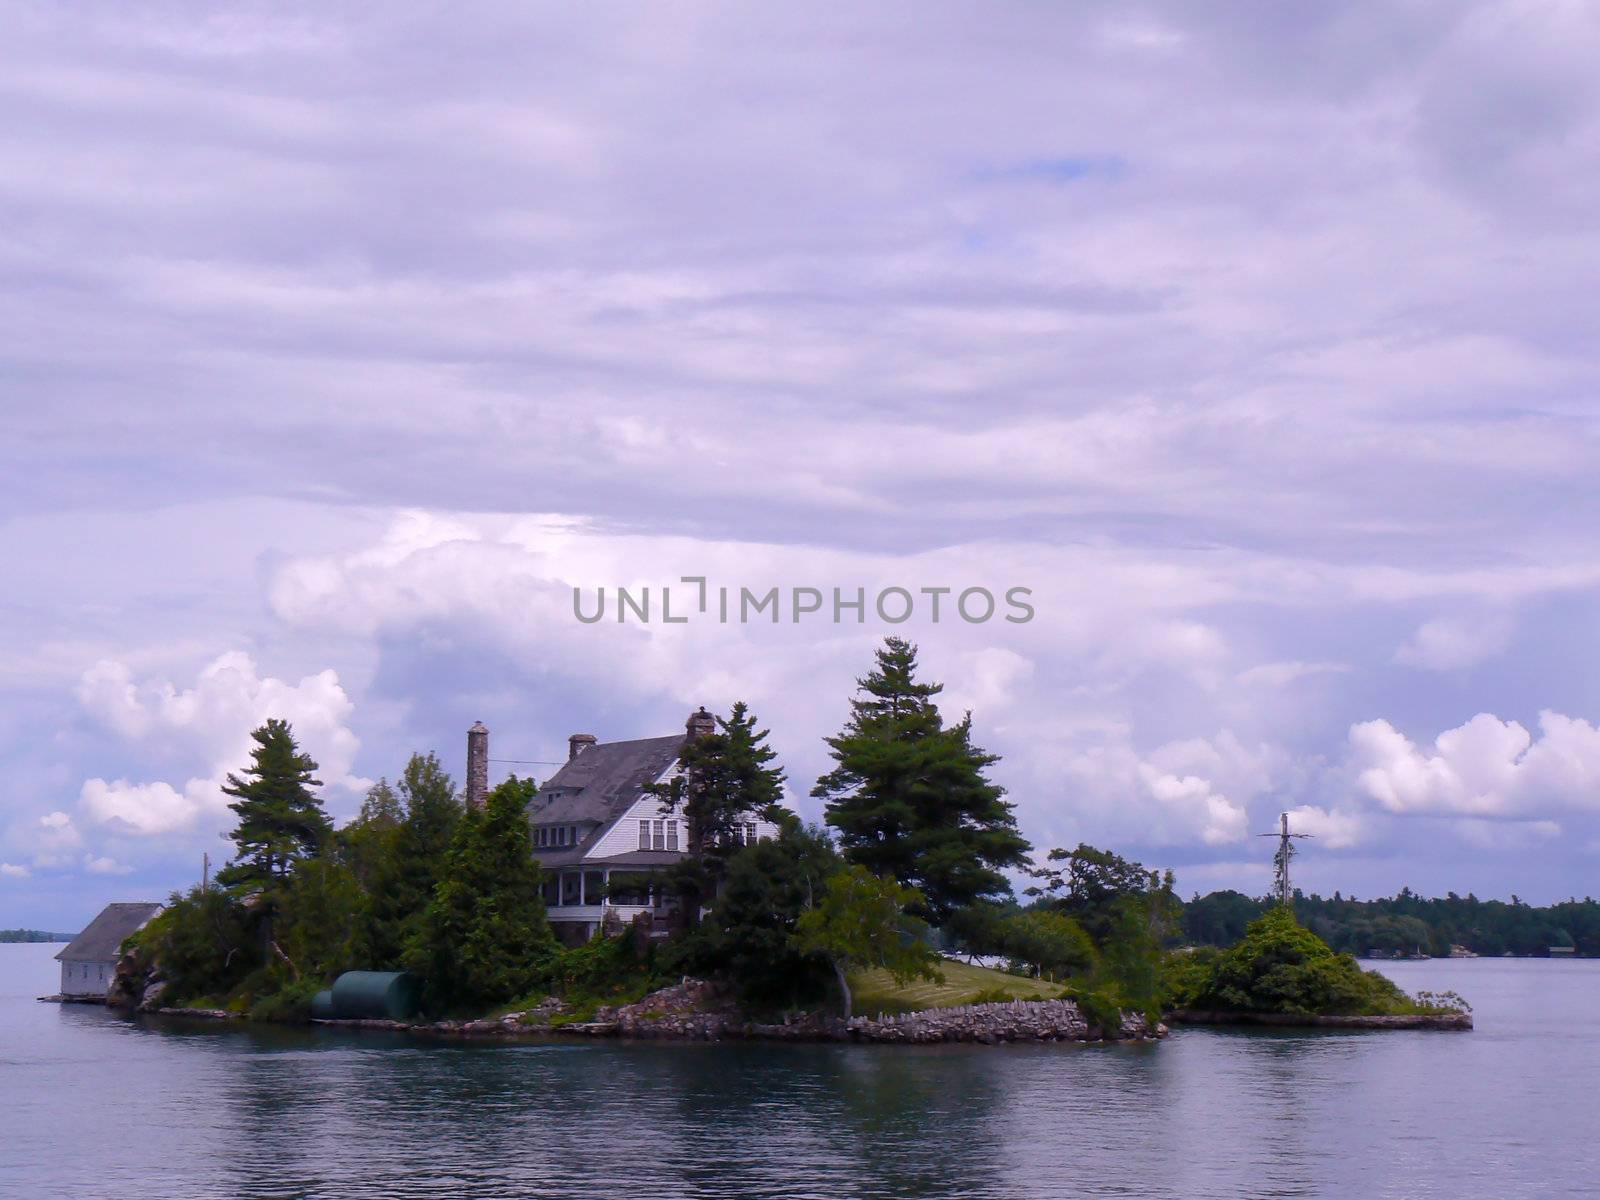 Islands and cross on thousand islands, Ontario lake, Canada by Elenaphotos21